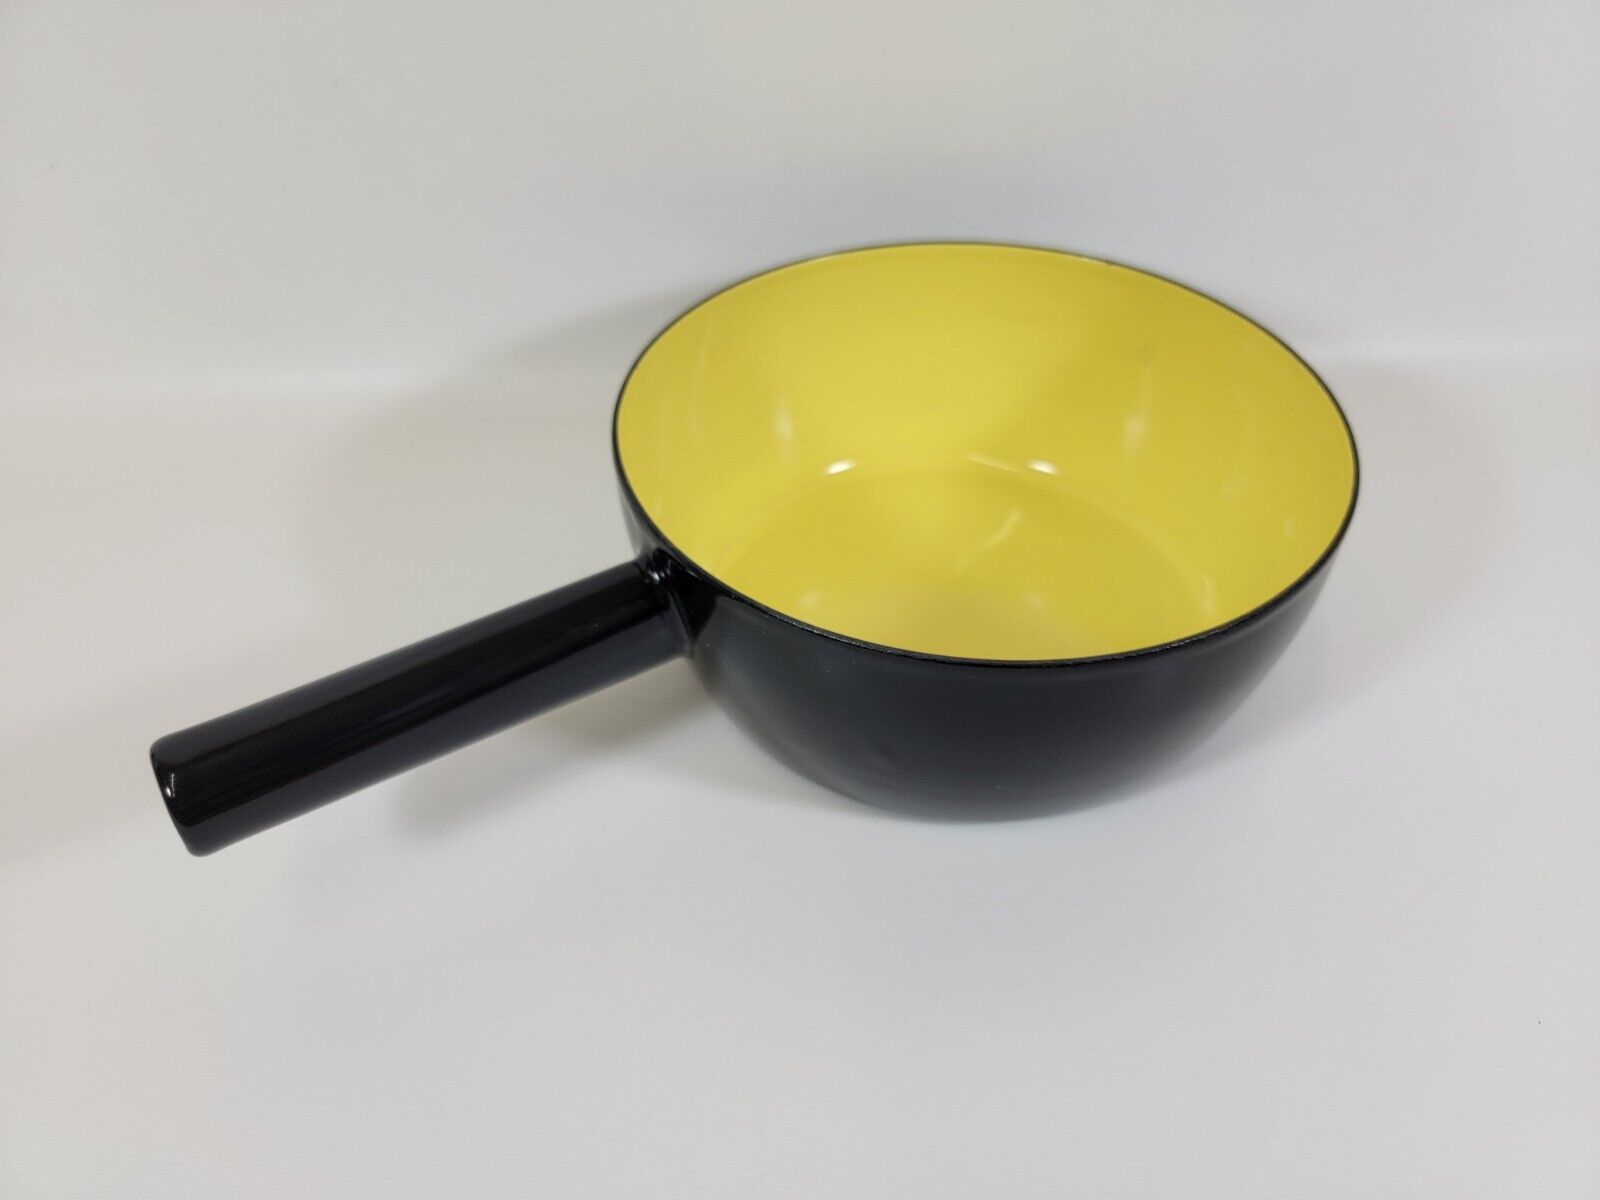 Vintage Mid-Century Swiss Made Enameled Cast Iron Cookware Pan 7